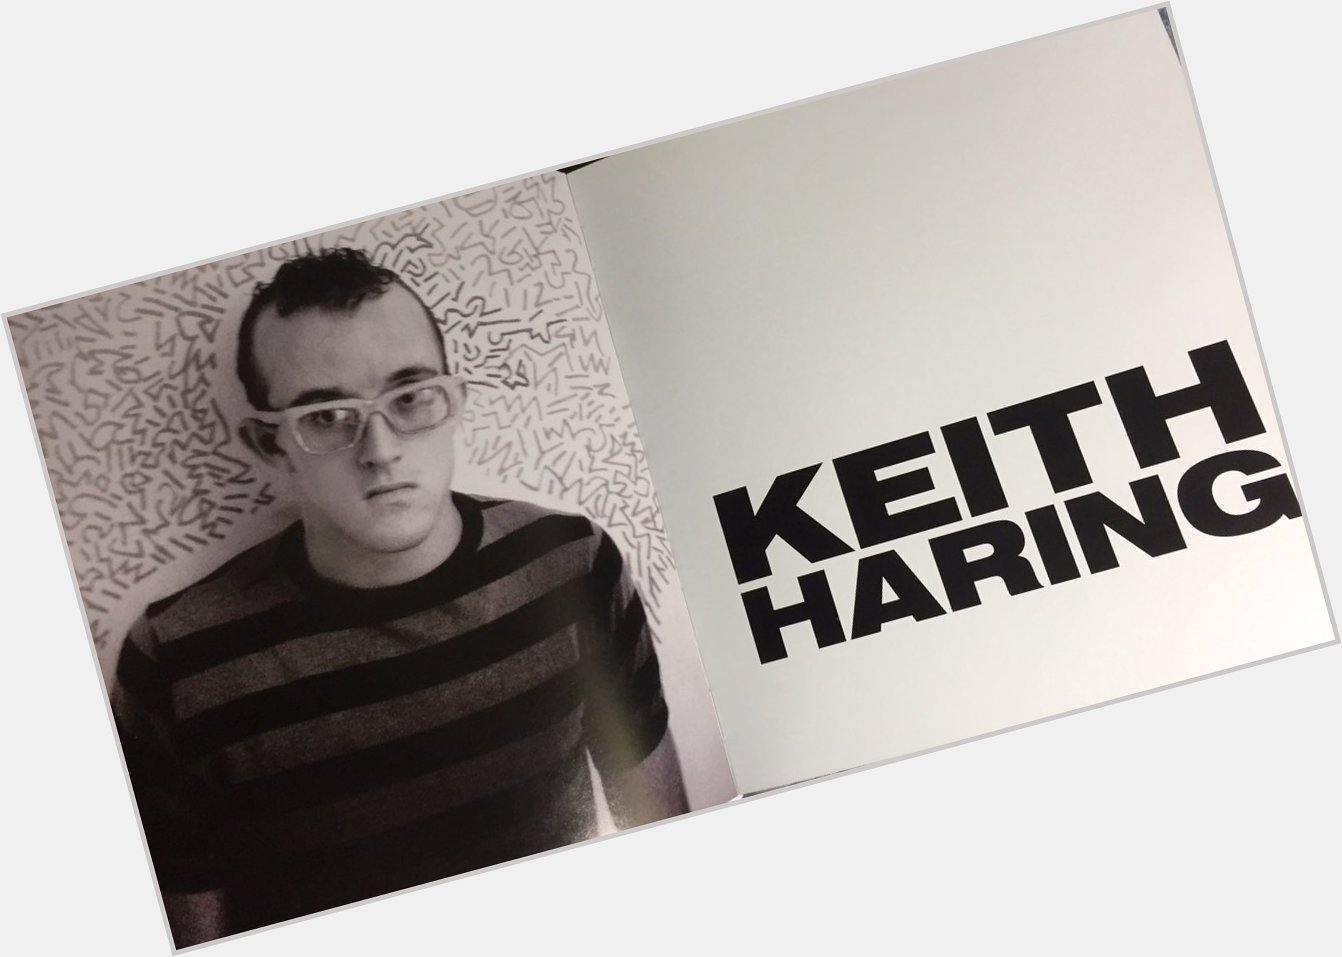 Keith Haring would have been 59 today. Happy Birthday Keith! RIP 